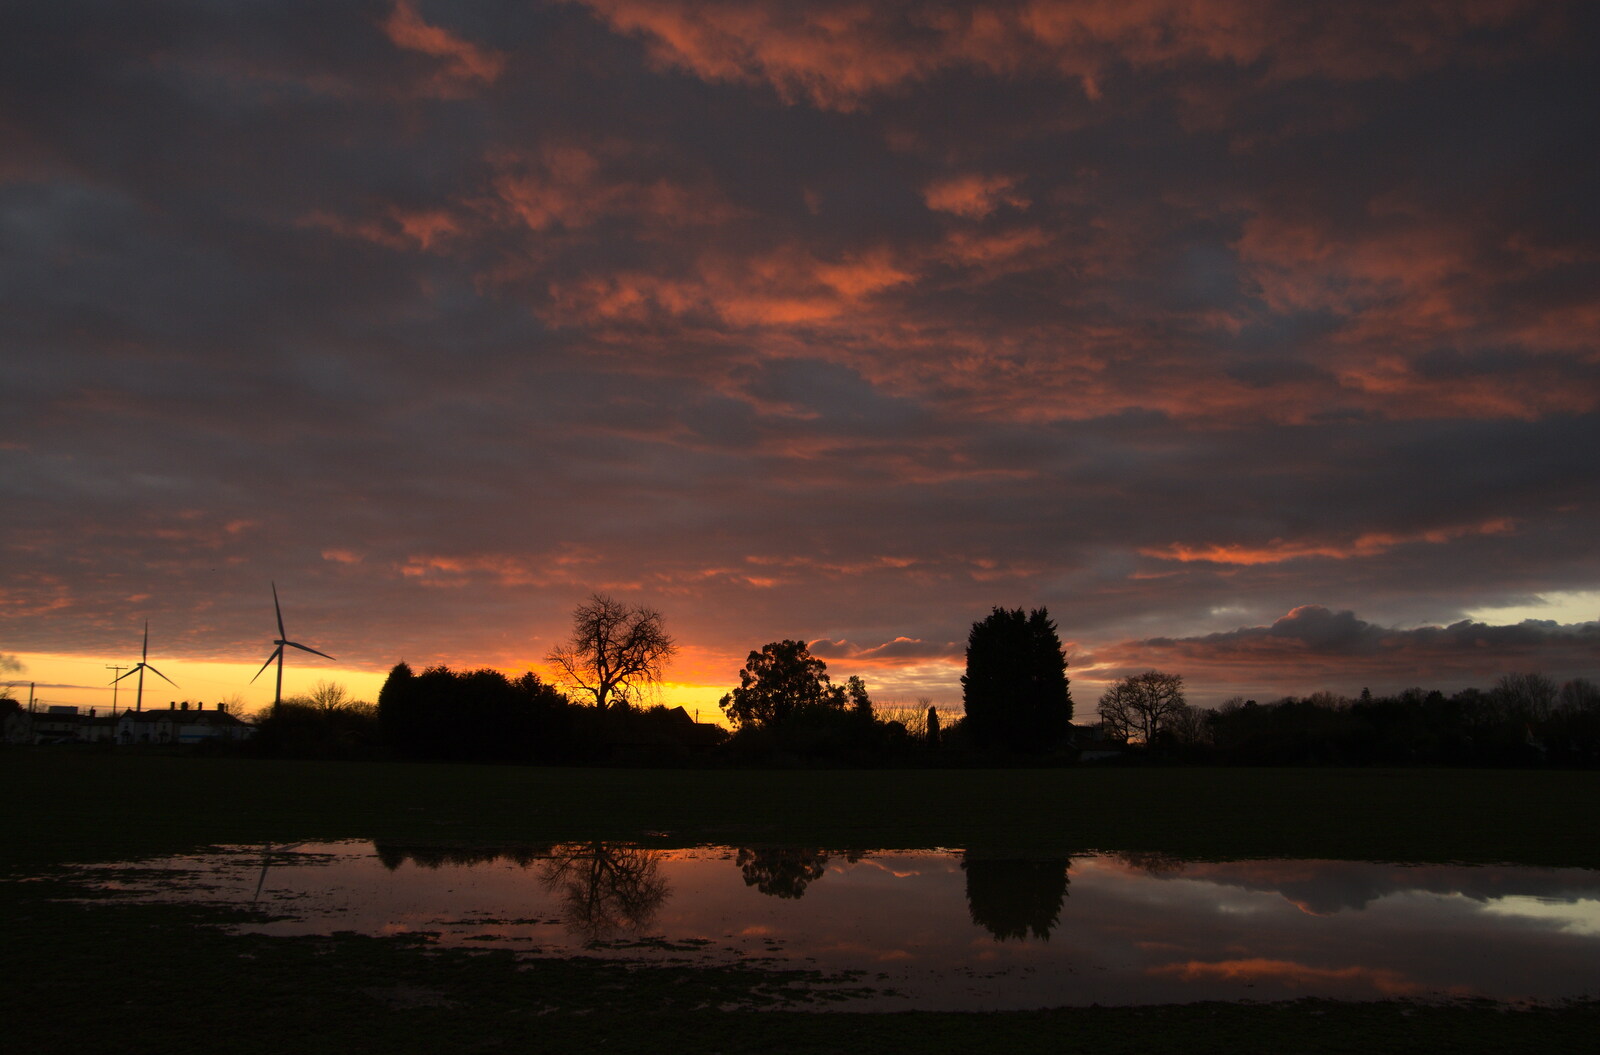 A sunset over a flooded field from Fun With Ice in Lockdown, Brome, Suffolk - 10th January 2021